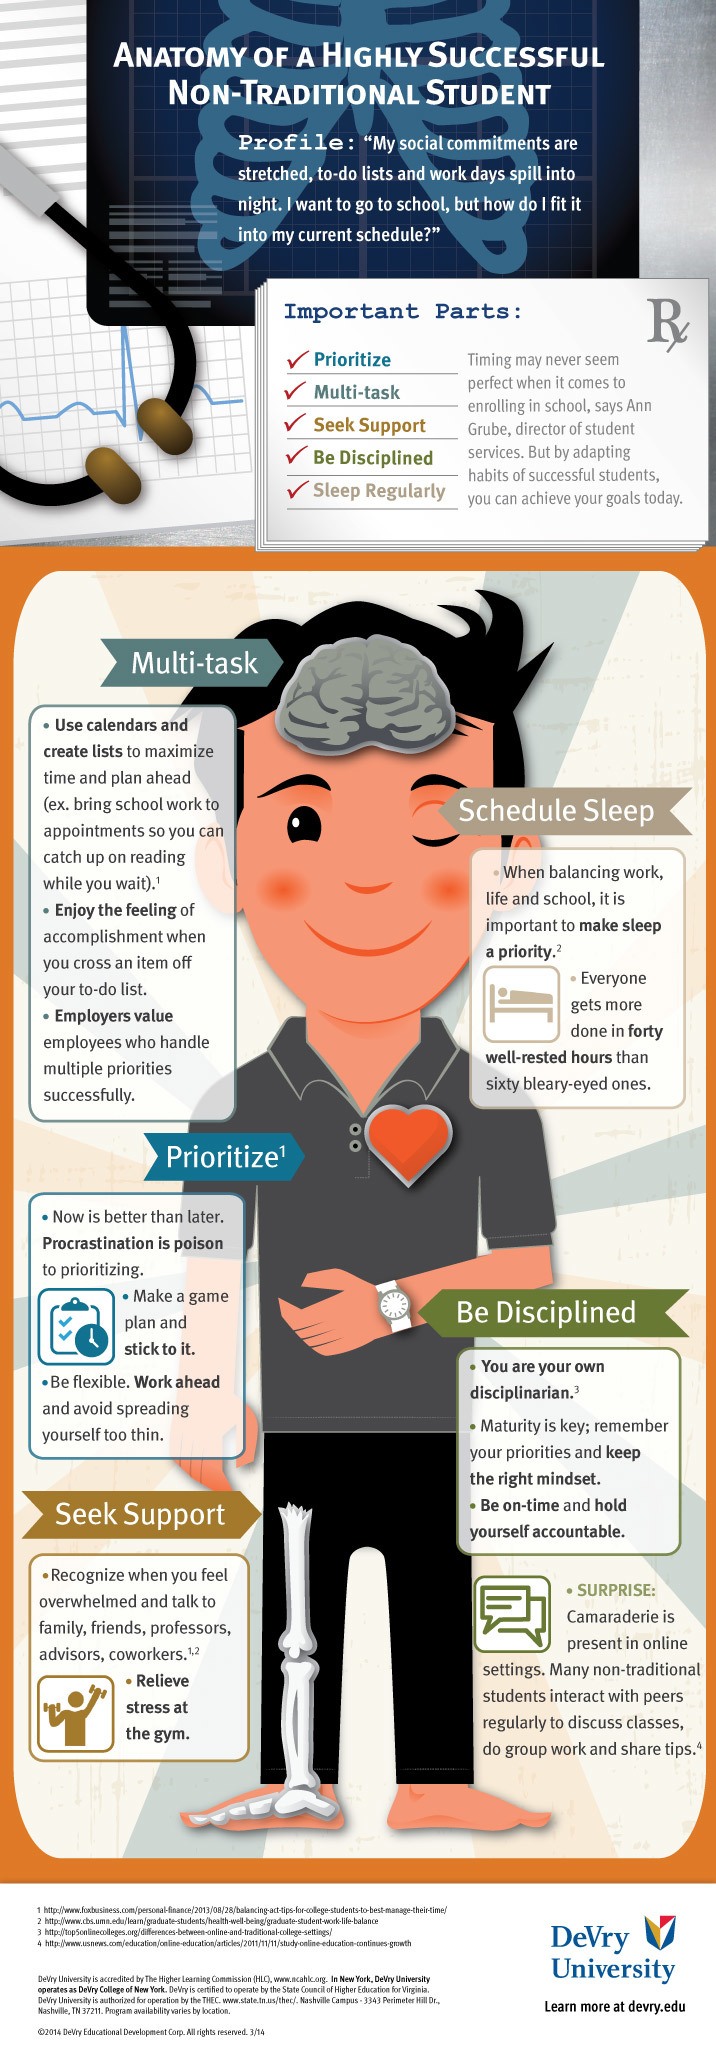 Anatomy of a Highly Successful Non-Traditional Student Infographic